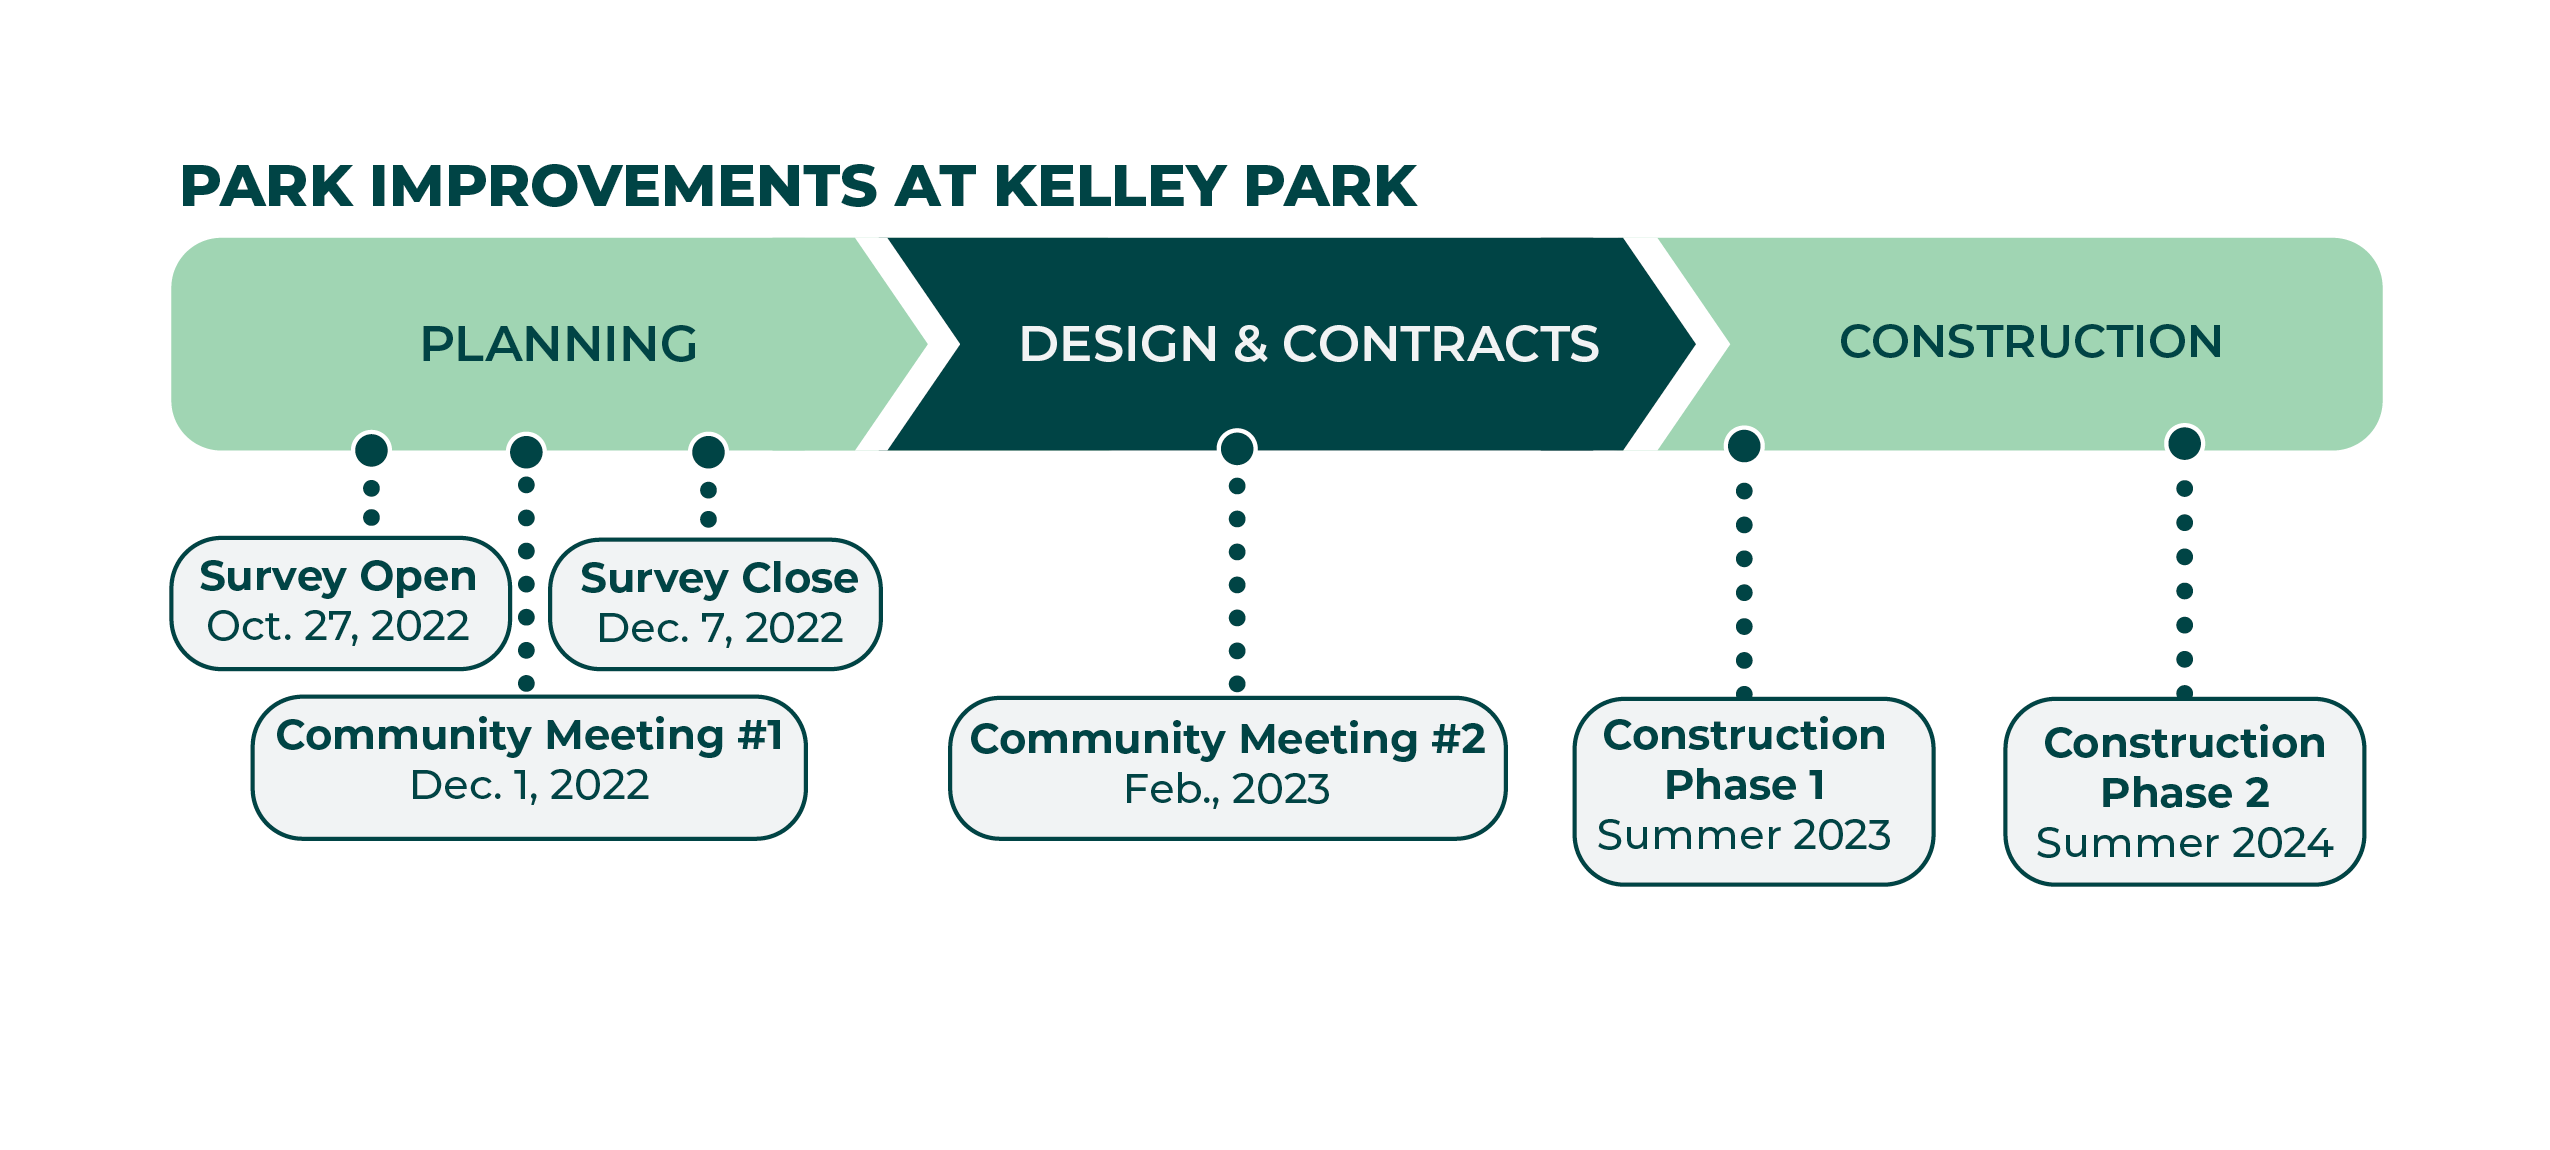 Design and Planning in 2022-23, construction starting in summer 2023